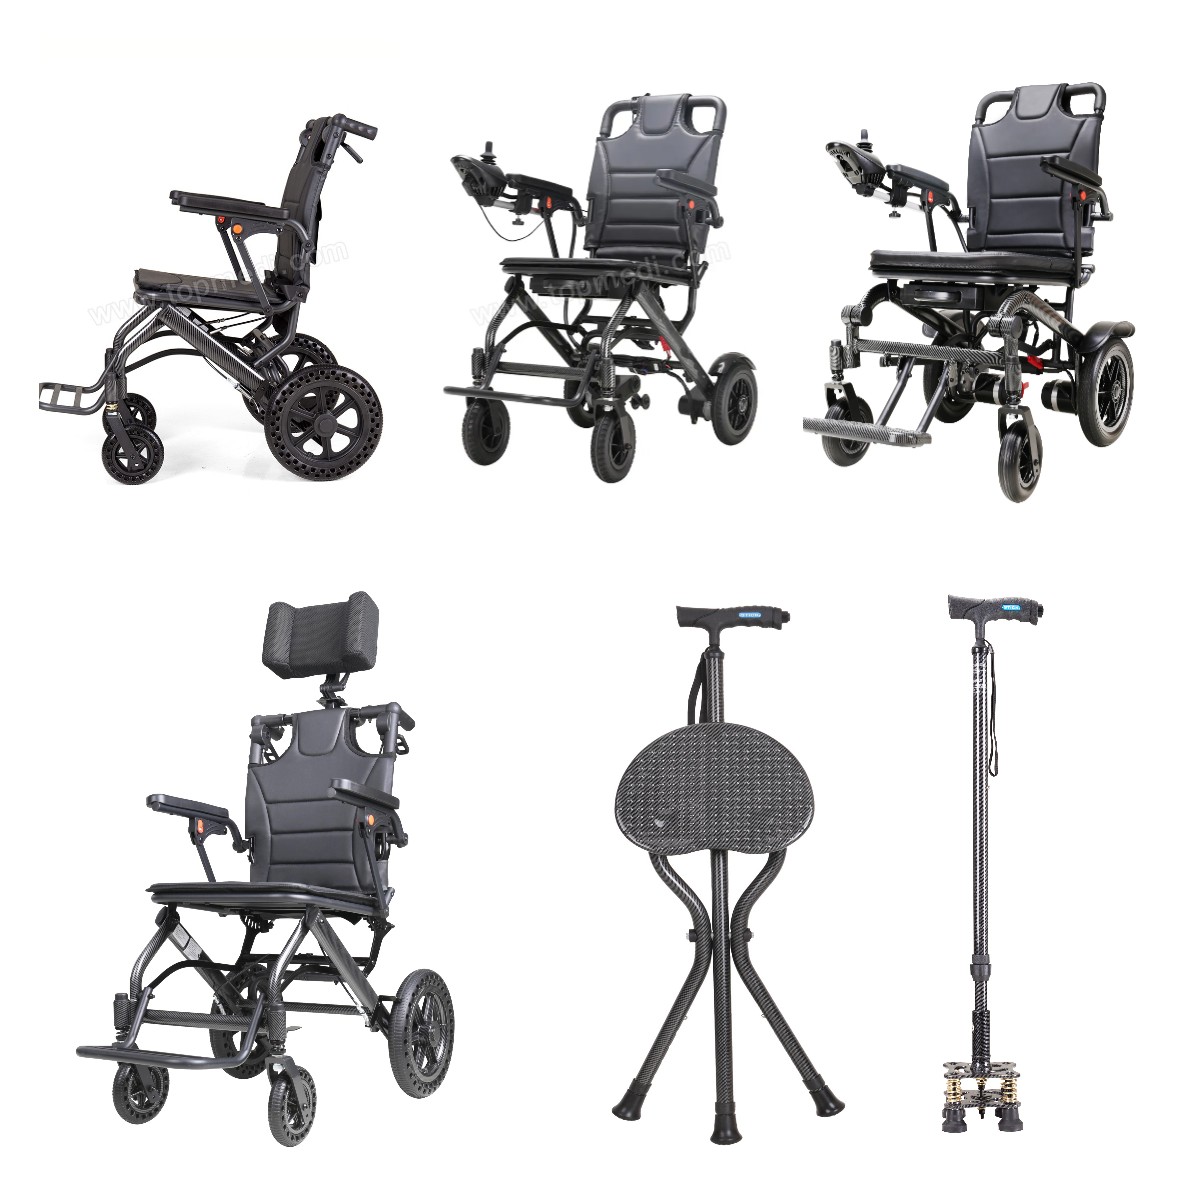 How do users in different living areas choose a suitable electric wheelchair?